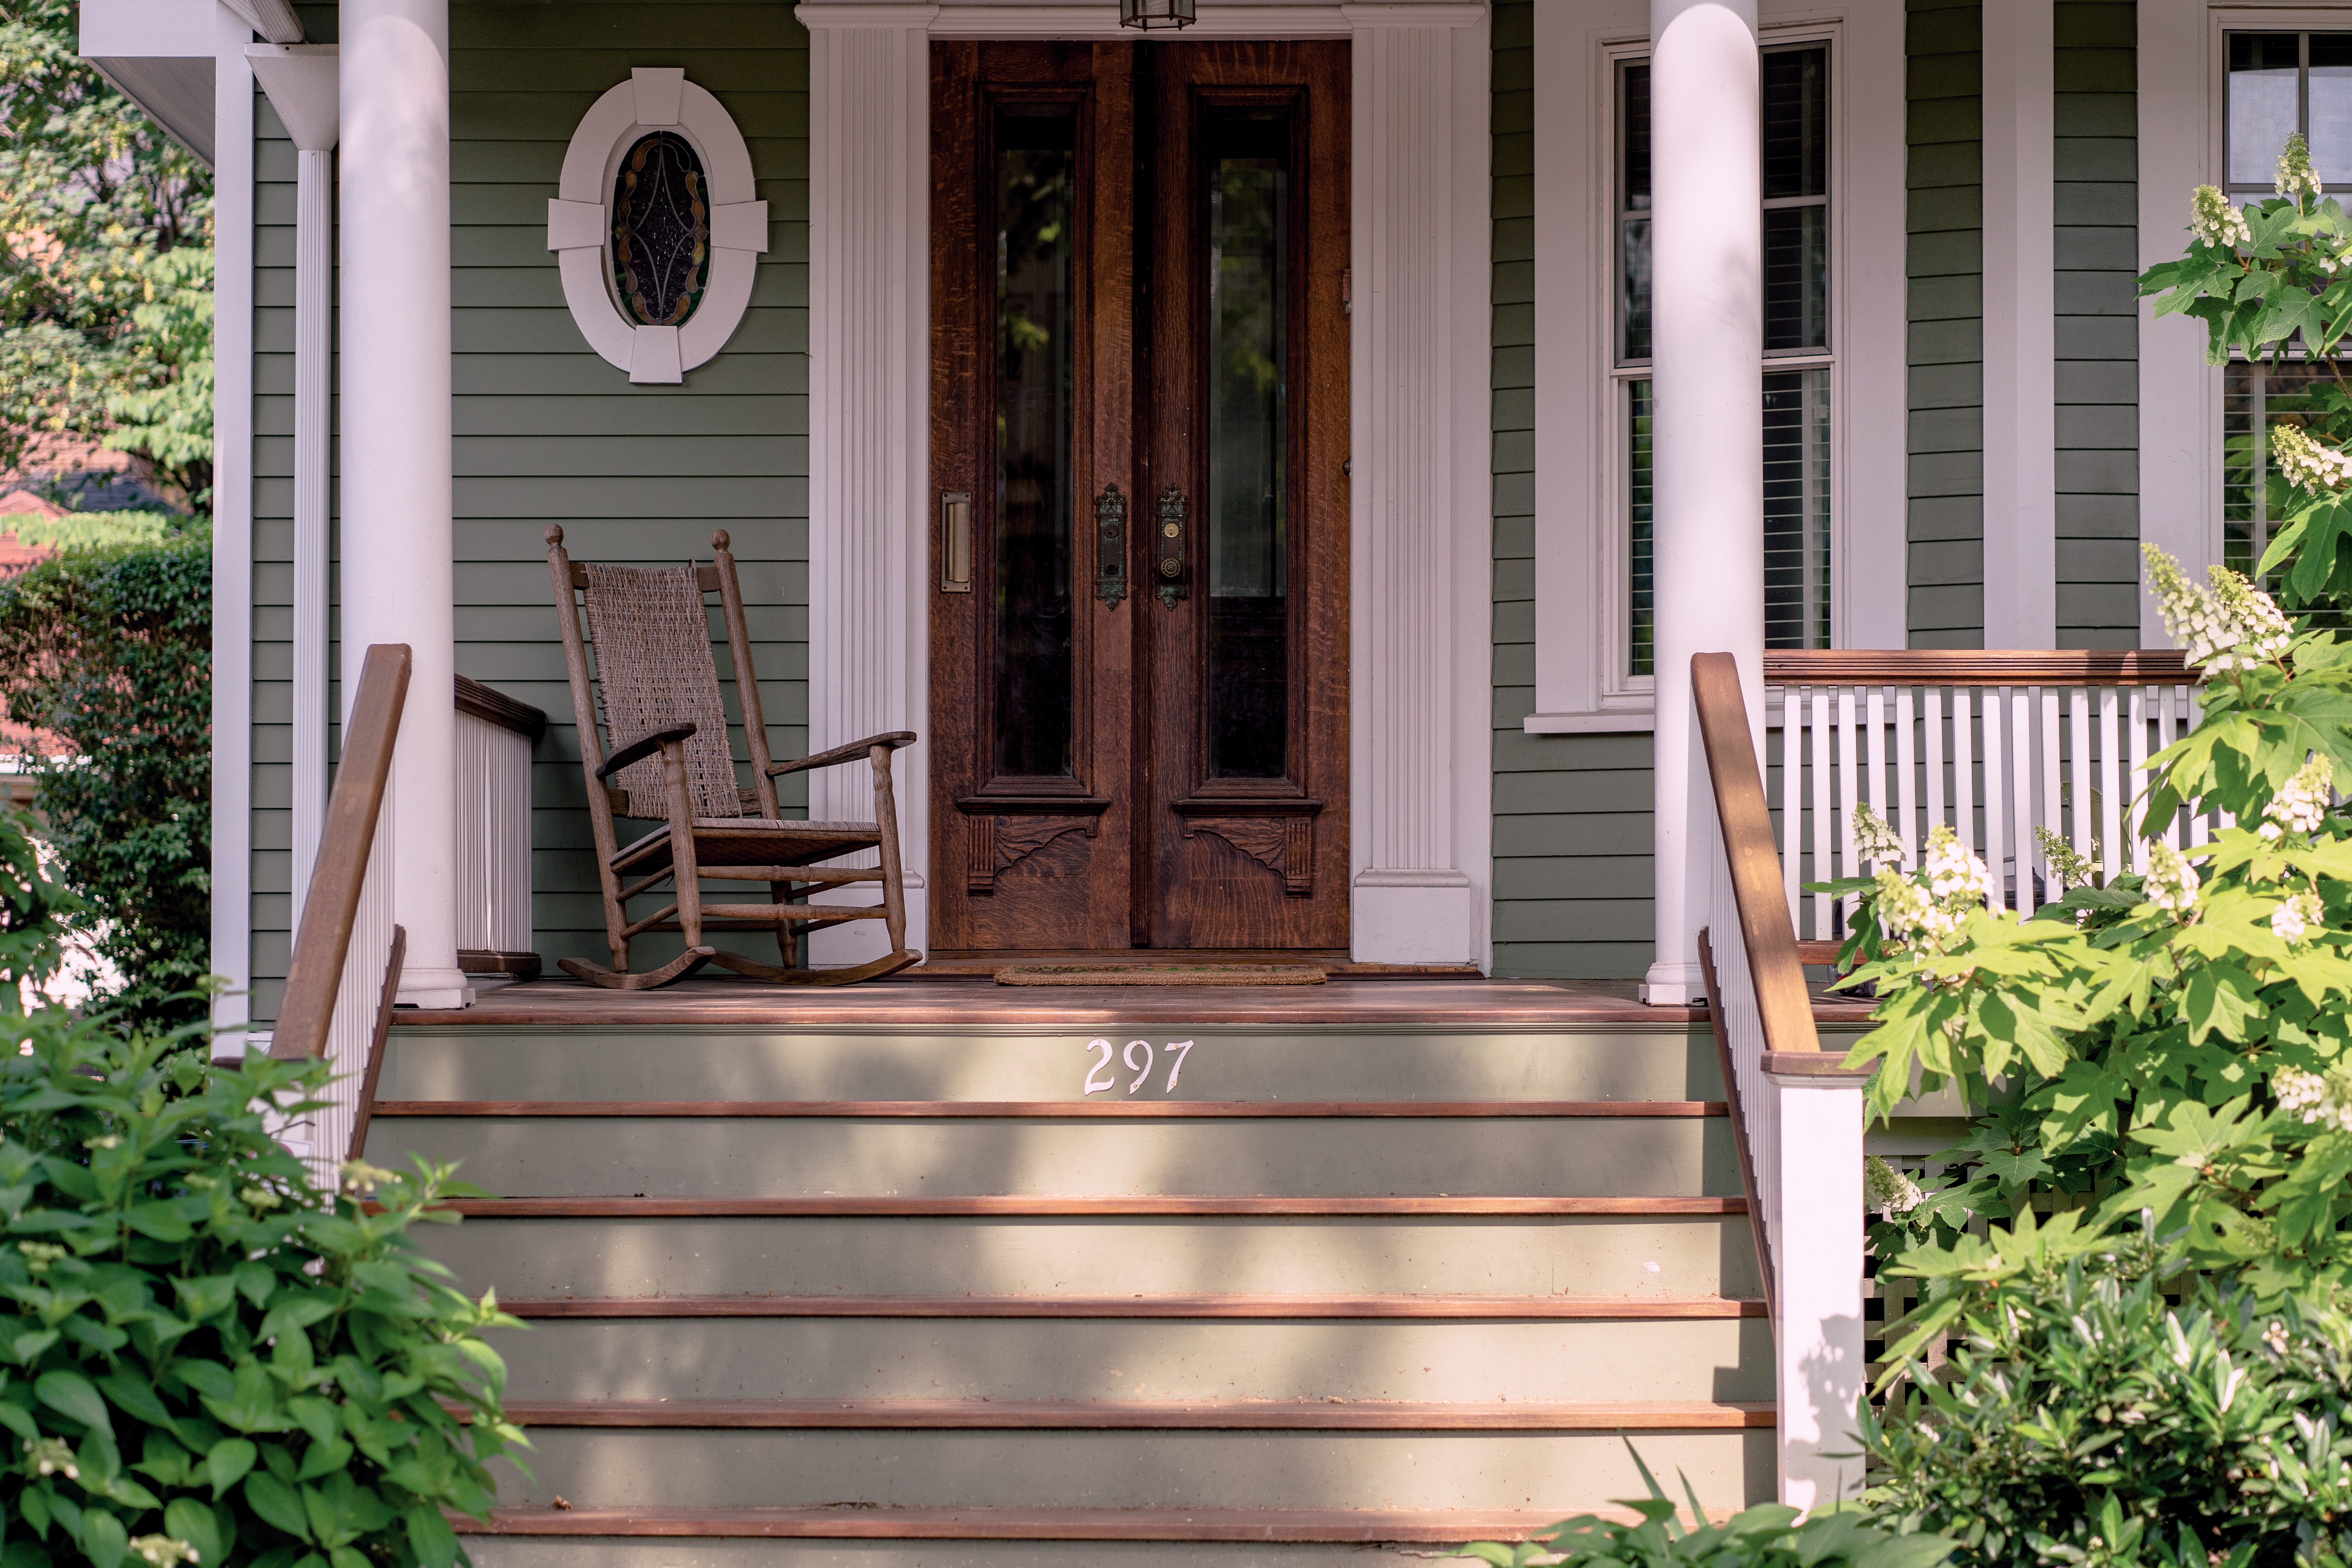 Maintain a Picture-Perfect Porch's featured image